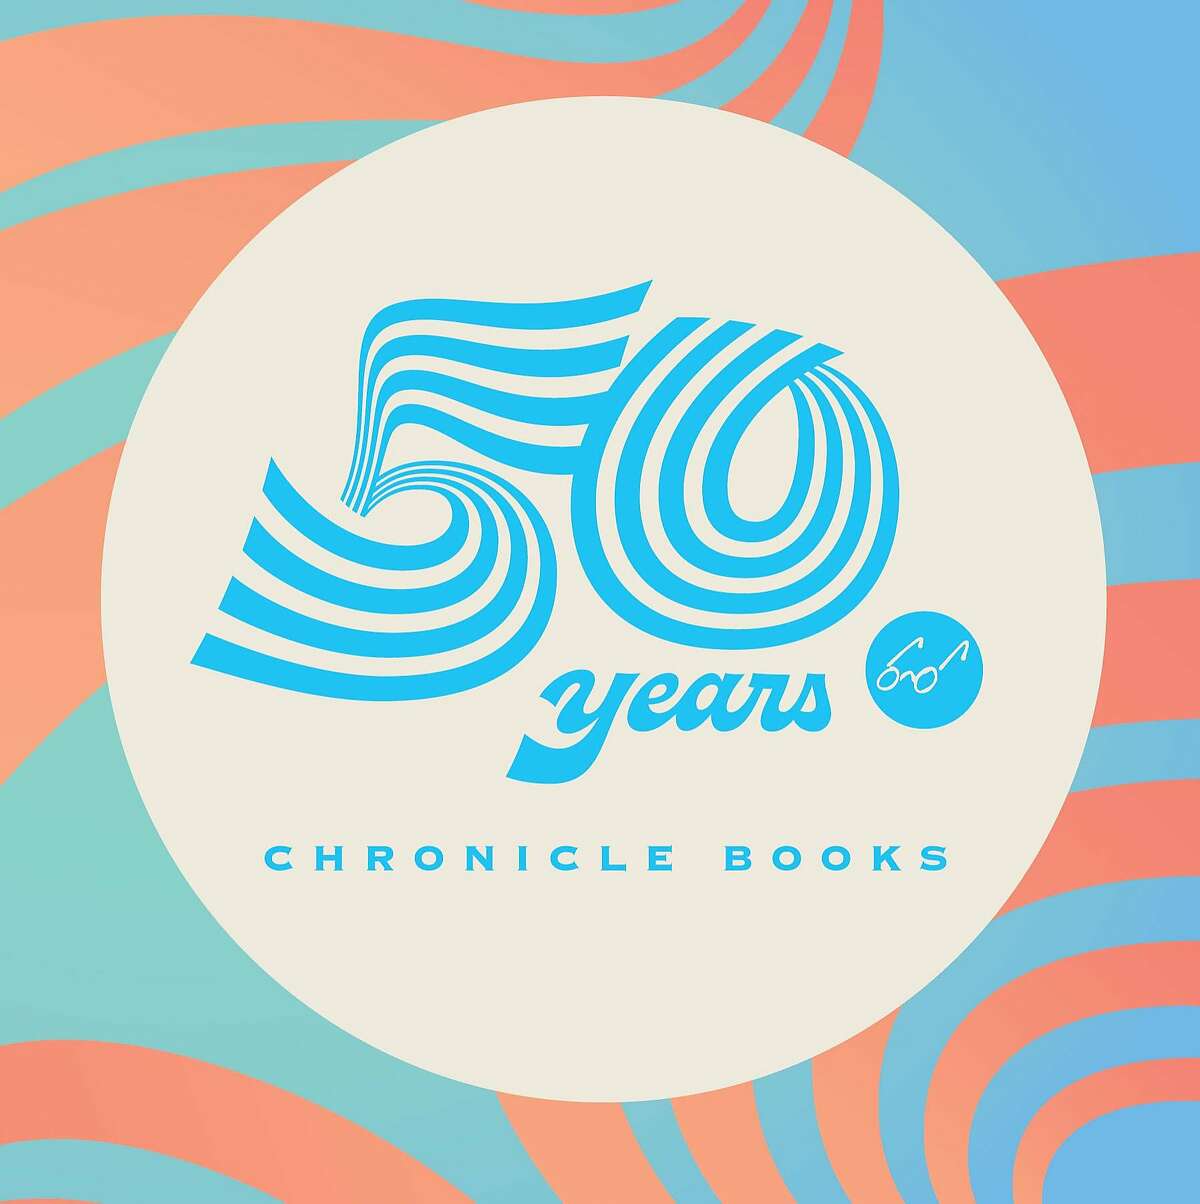 Chronicle Books celebrates it's 50th anniversary this year with an exhibition, a new commemorative tome and an espresso blend.